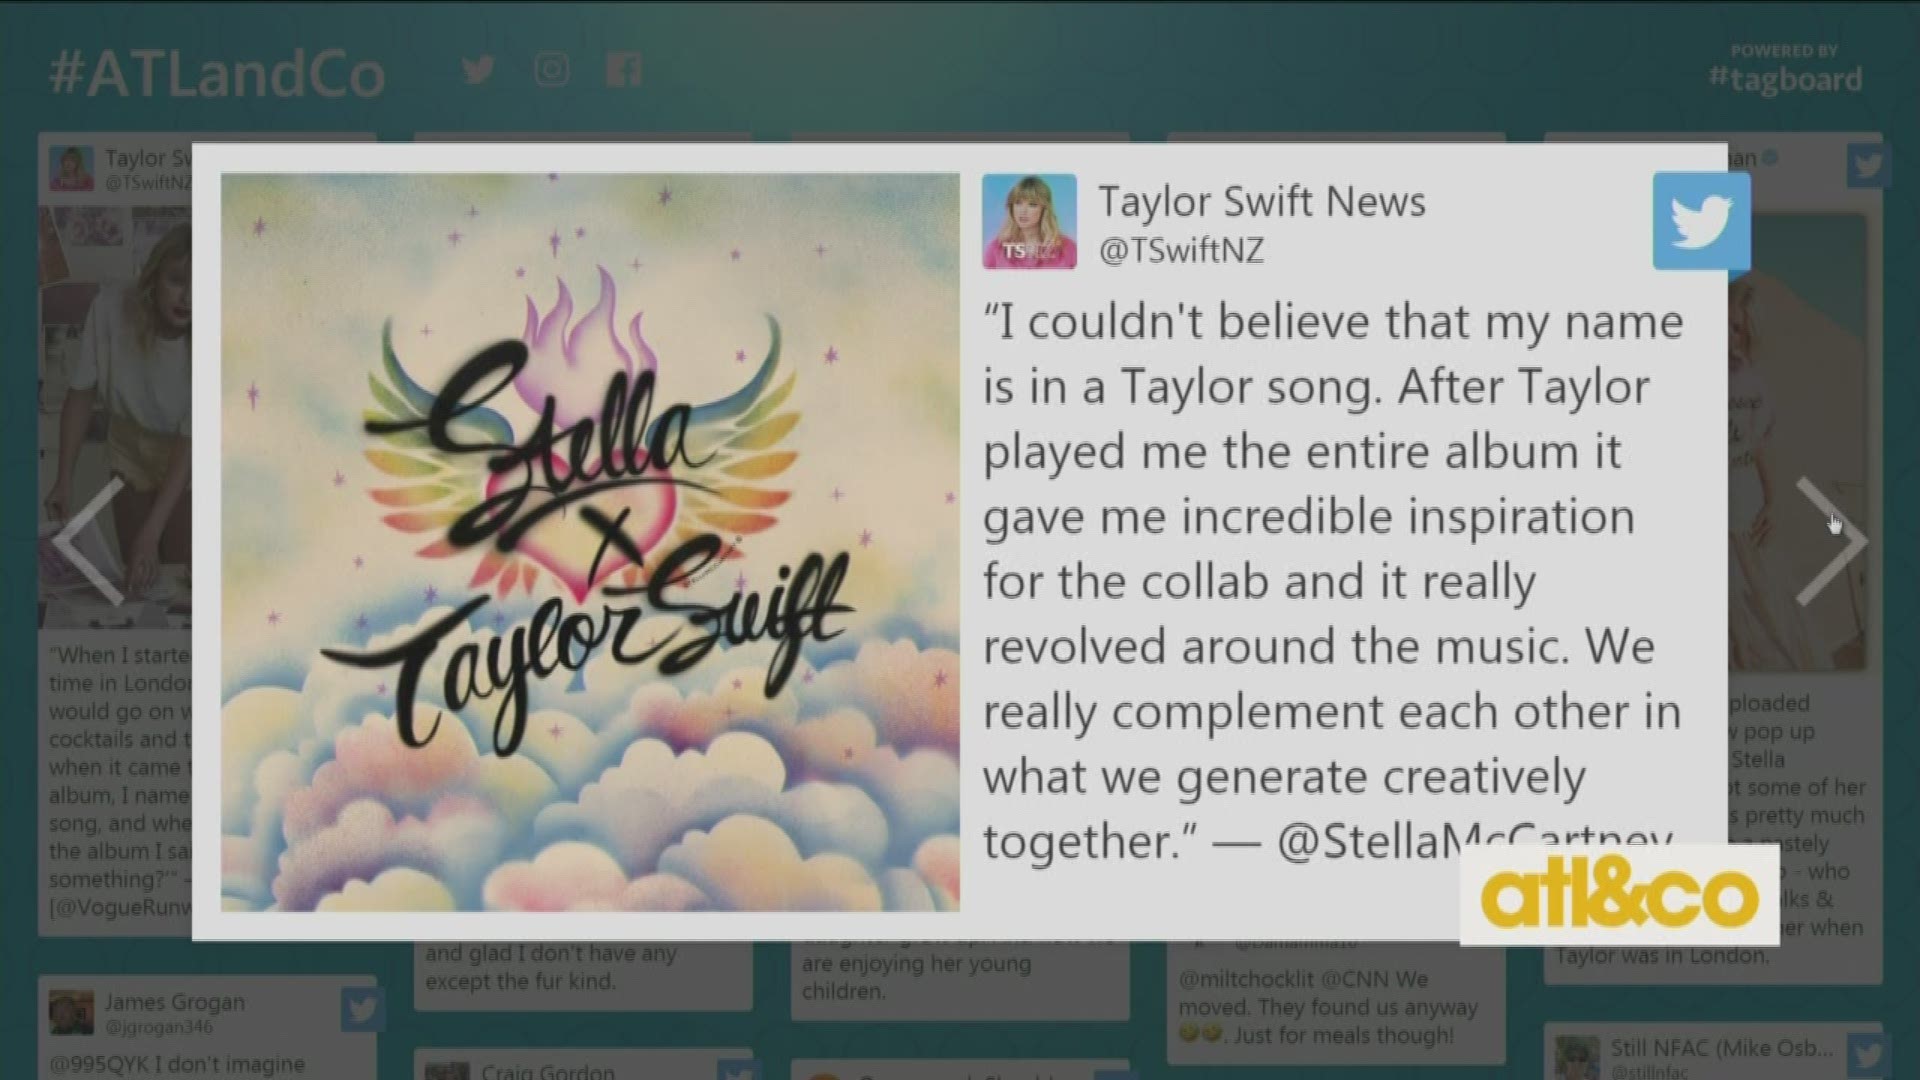 Preview Taylor Swift's new limited edition line of clothing and accessories with famed designer Stella McCartney. The pastel-infused line's inspired by her new album 'Lover'.